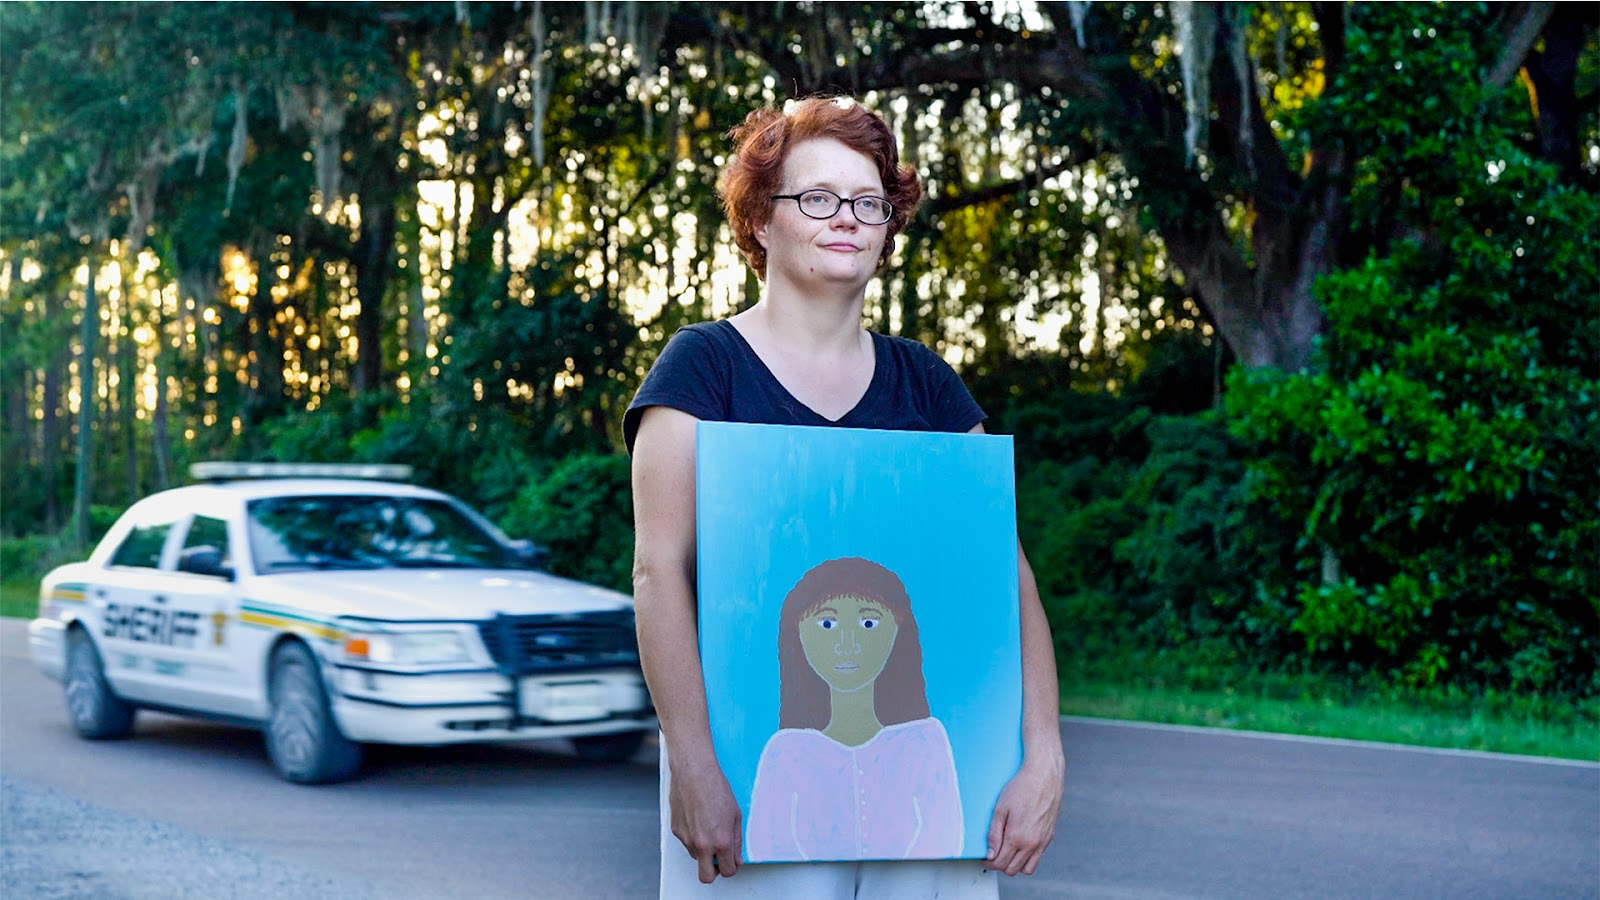 White woman with short red hair and glasses holds in front of her body a painted self-portrait of herself as a young girl while a police car drives behind her on a rural highway. Sun is glimmering in through trees in the background. In the painting she is wearing a pink shirt and is in front of a light blue background.